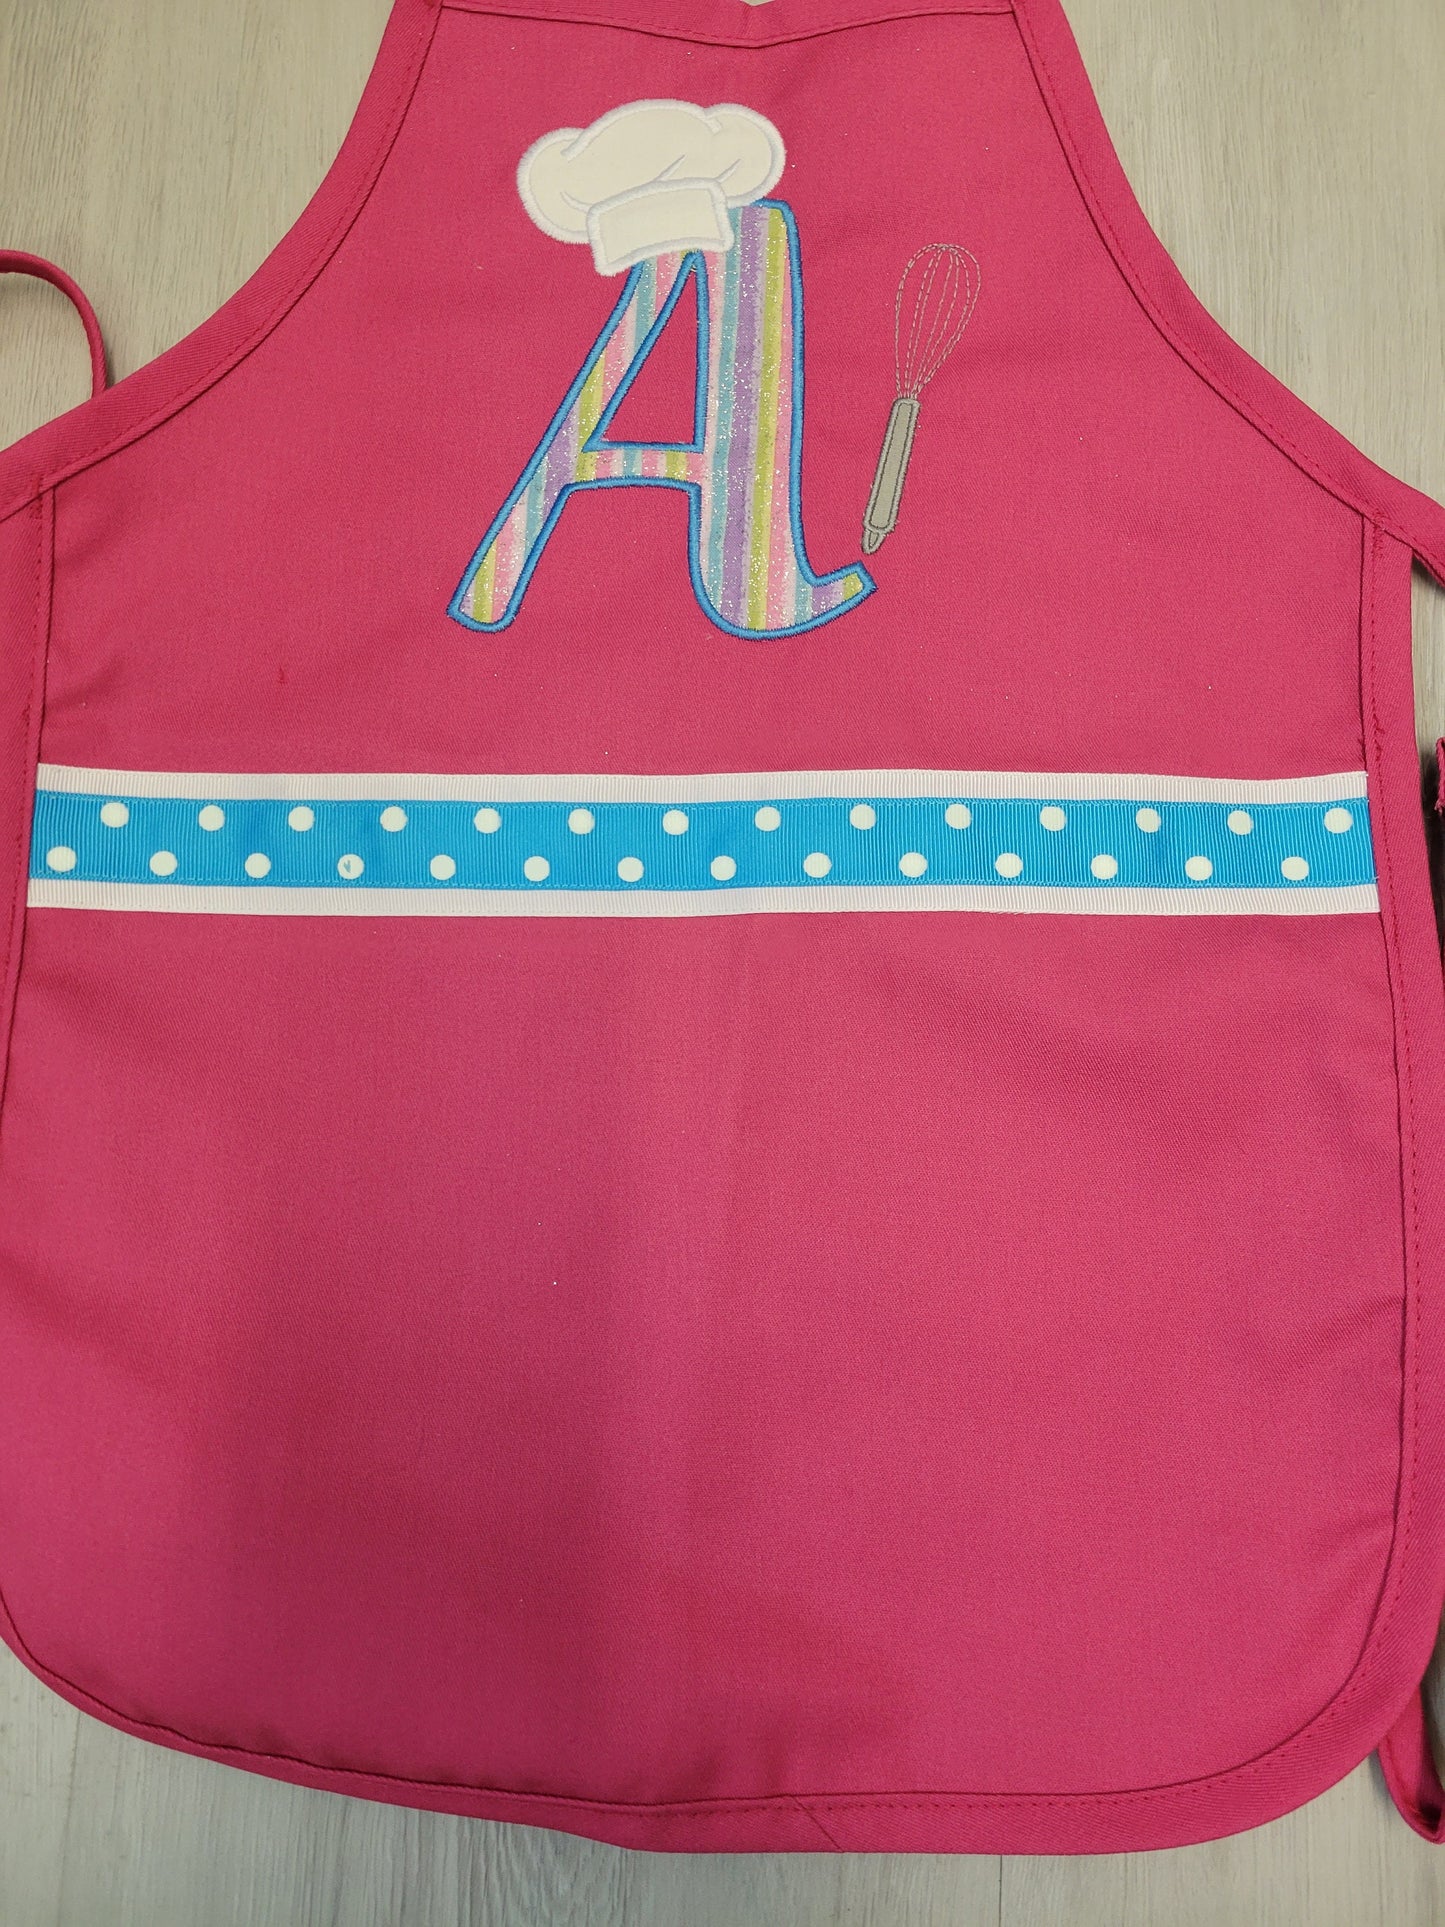 Kids personalized apron with Name and Initial, Glitter fabric embroidered applique, Girls baking apron, Girls Aprons